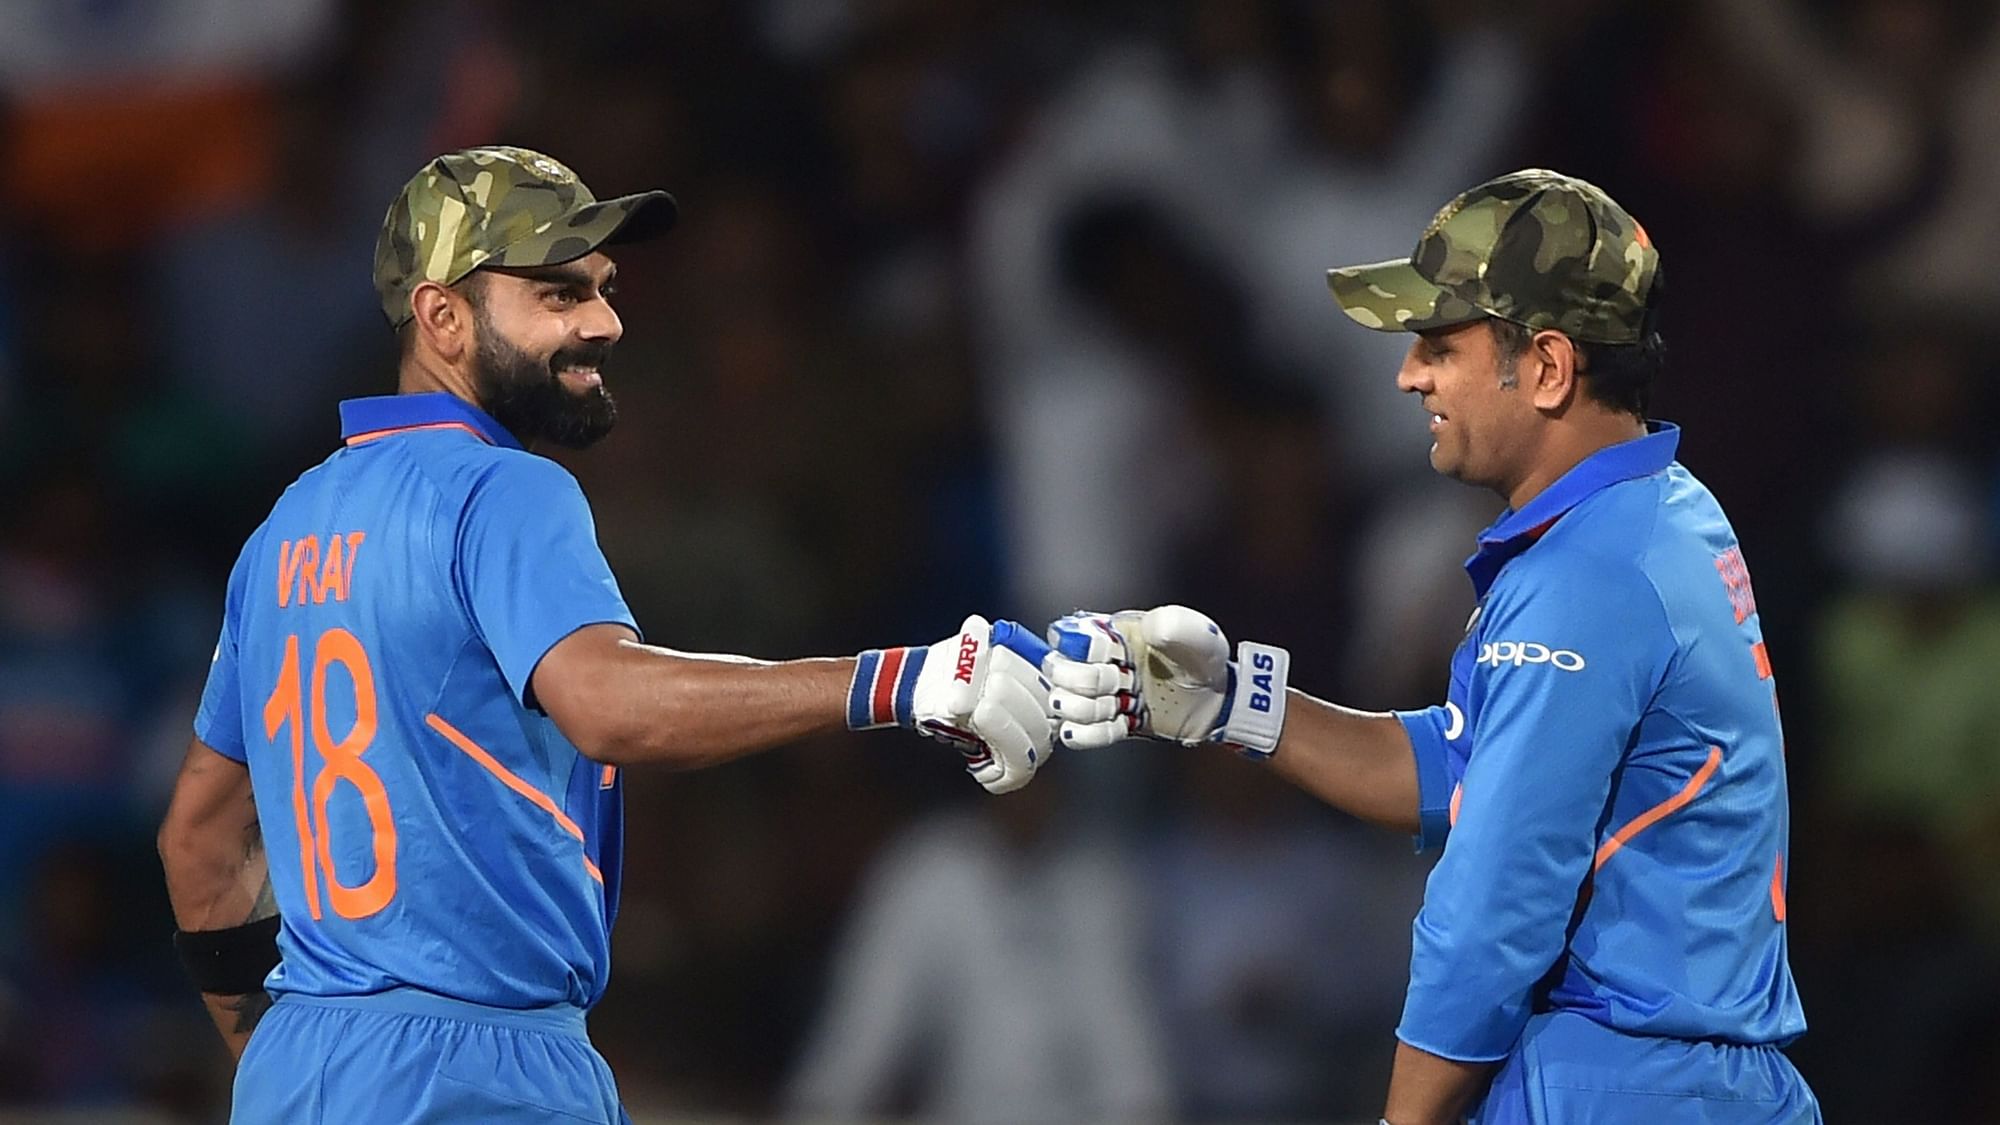 PCB has sent a strongly worded letter to the ICC, calling for action against India for wearing camouflage caps.